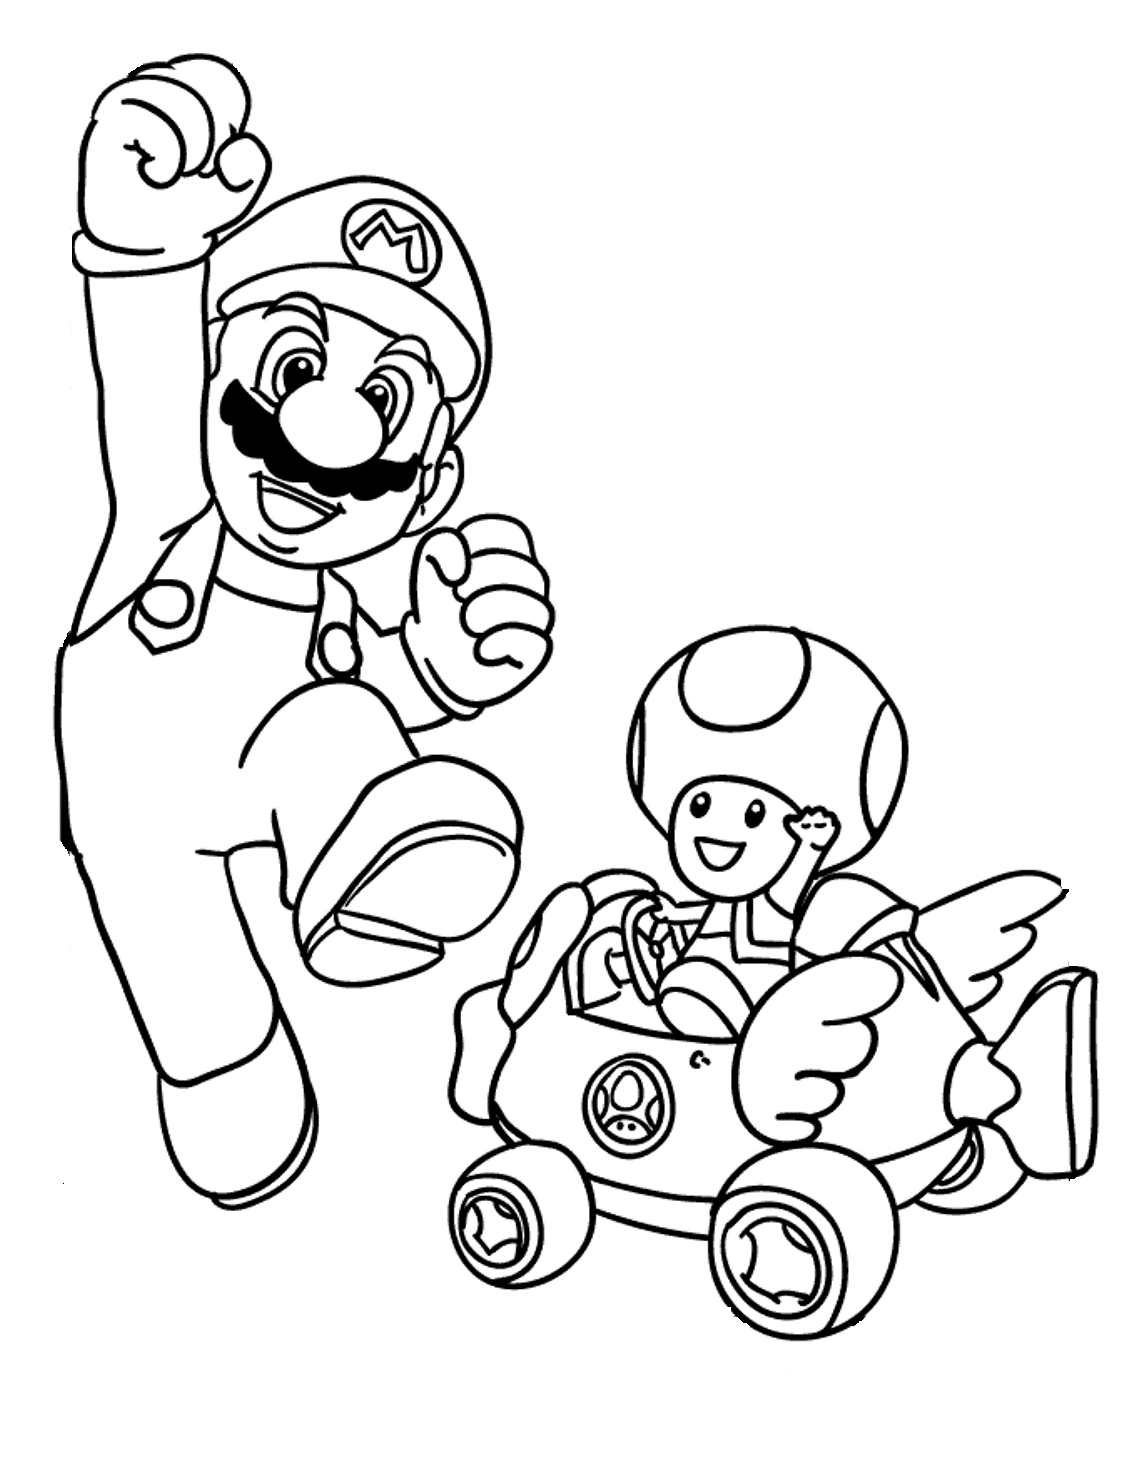 Mushroom And Mario Bros Coloring Pages | Cartoon Coloring pages of ...